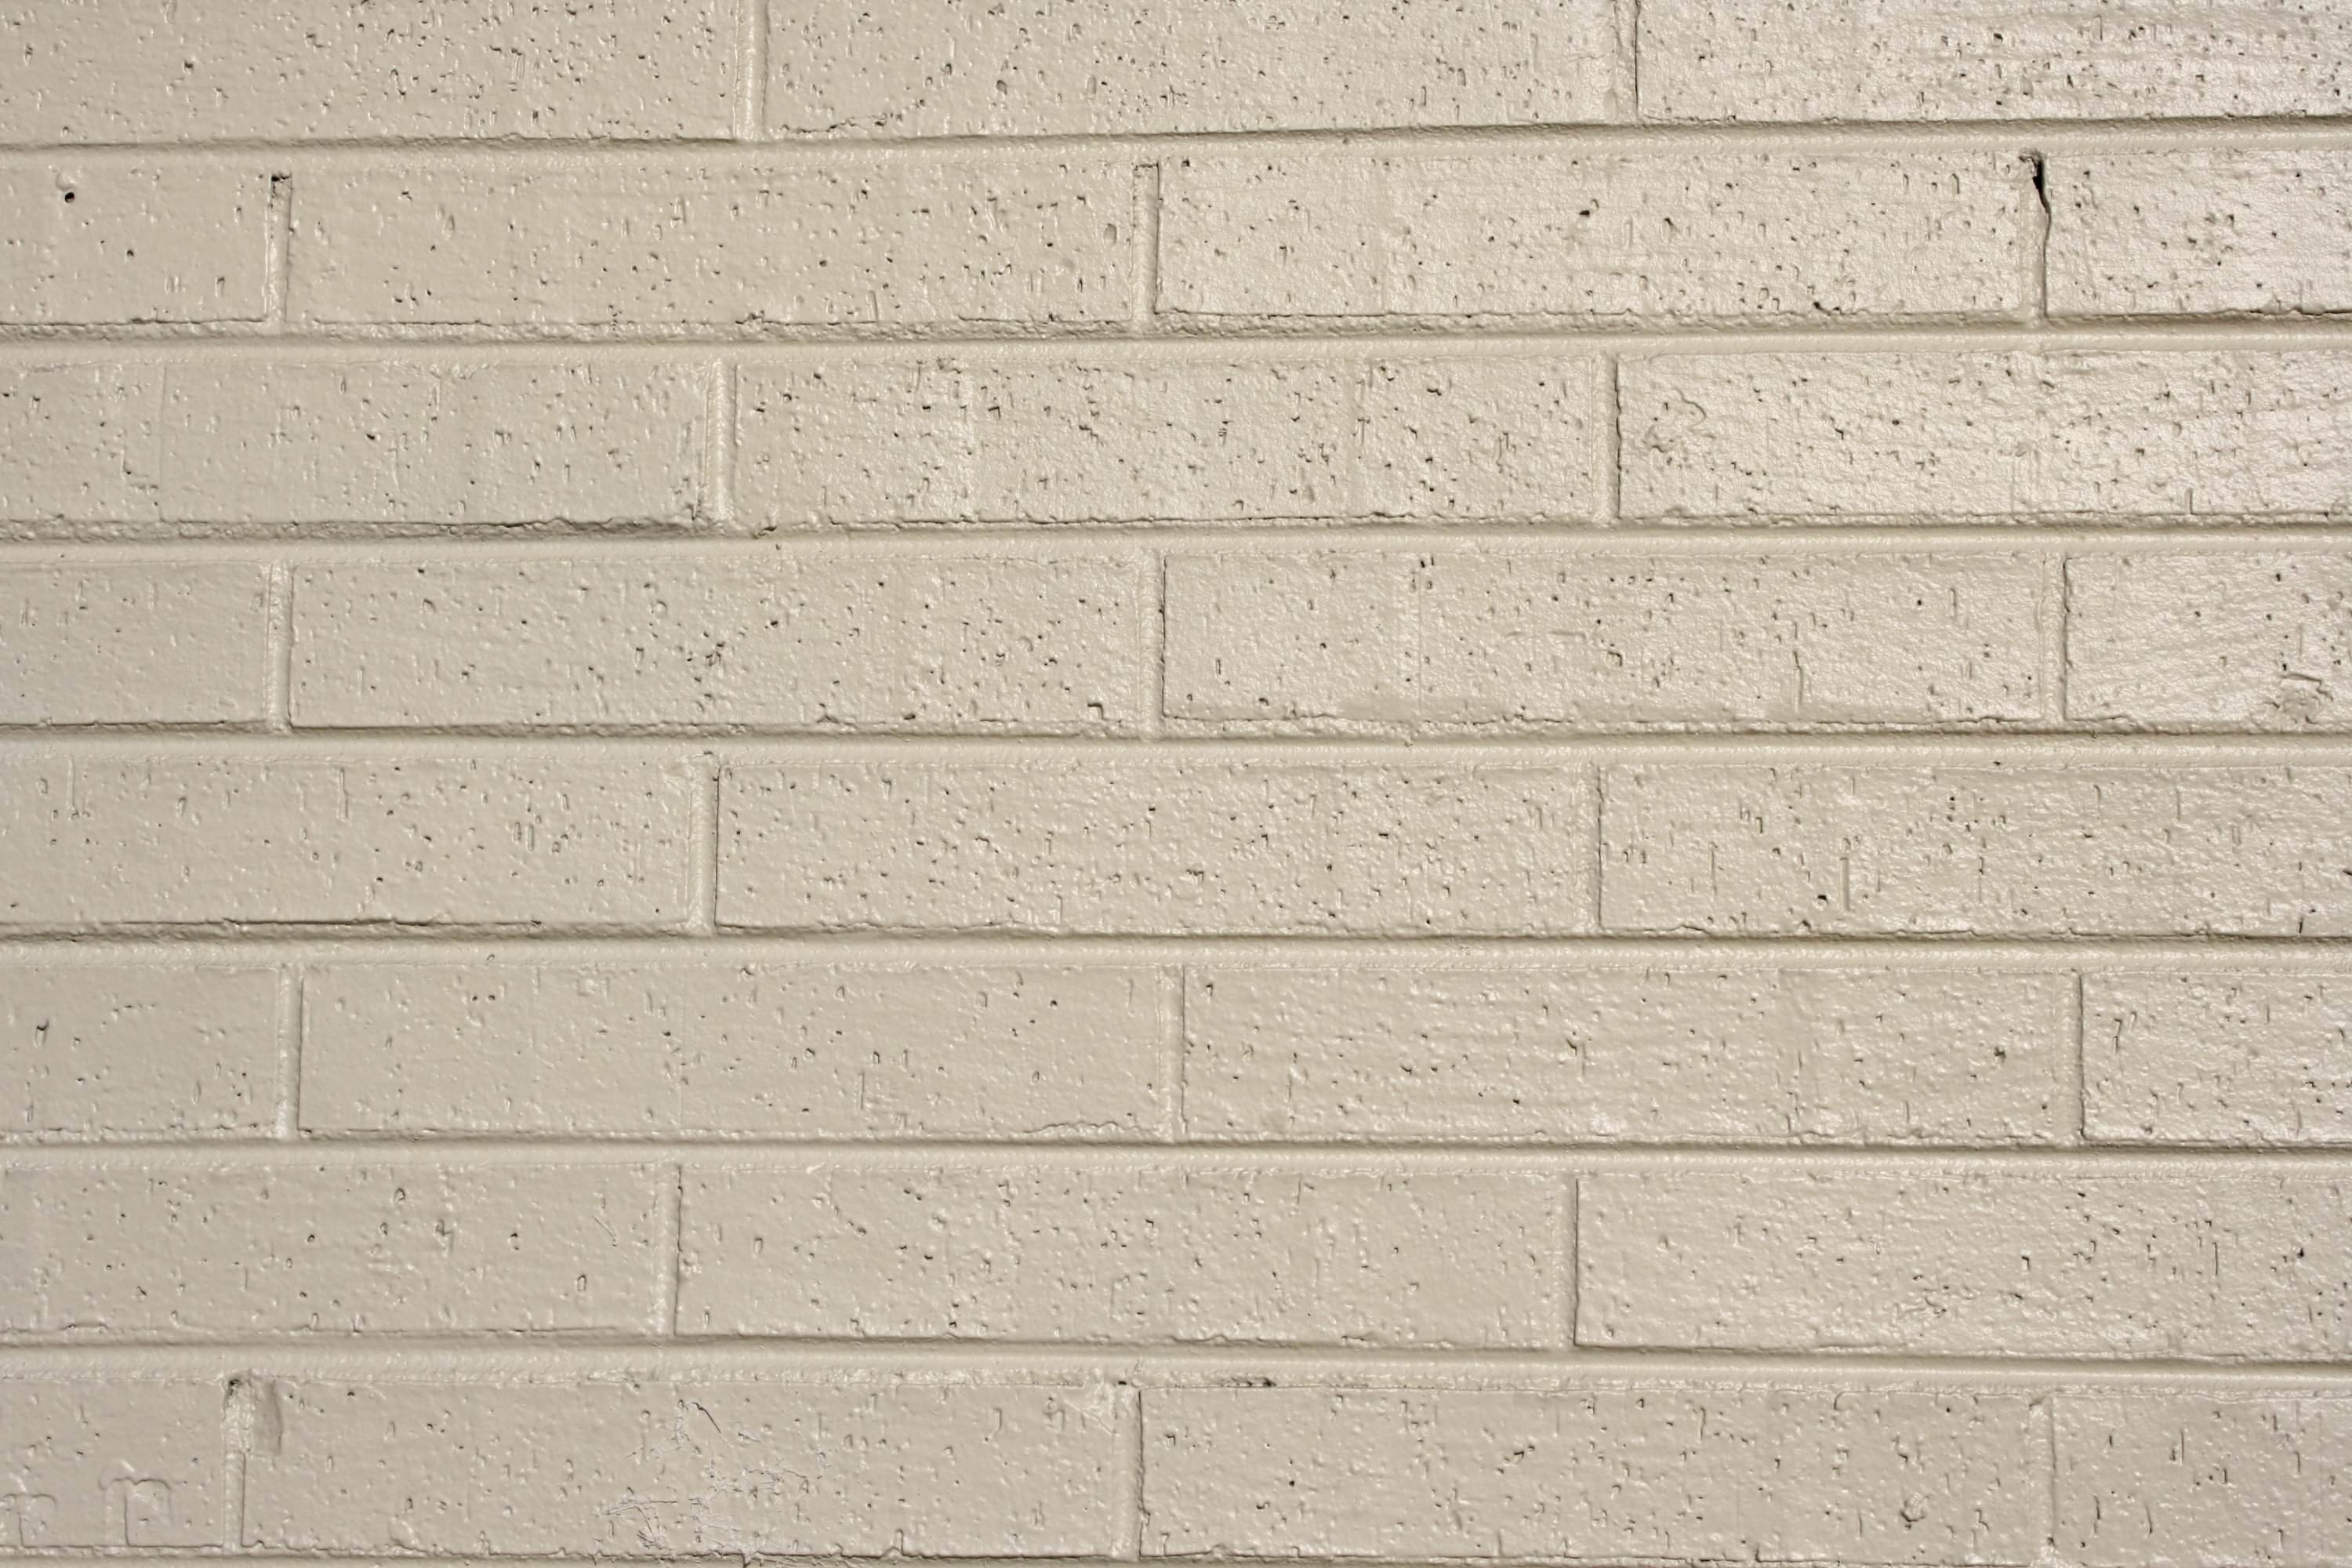 3000x2000 Brick Wall Backgrounds Psd Vector Eps Jpg Download Best Cream Colored  Background